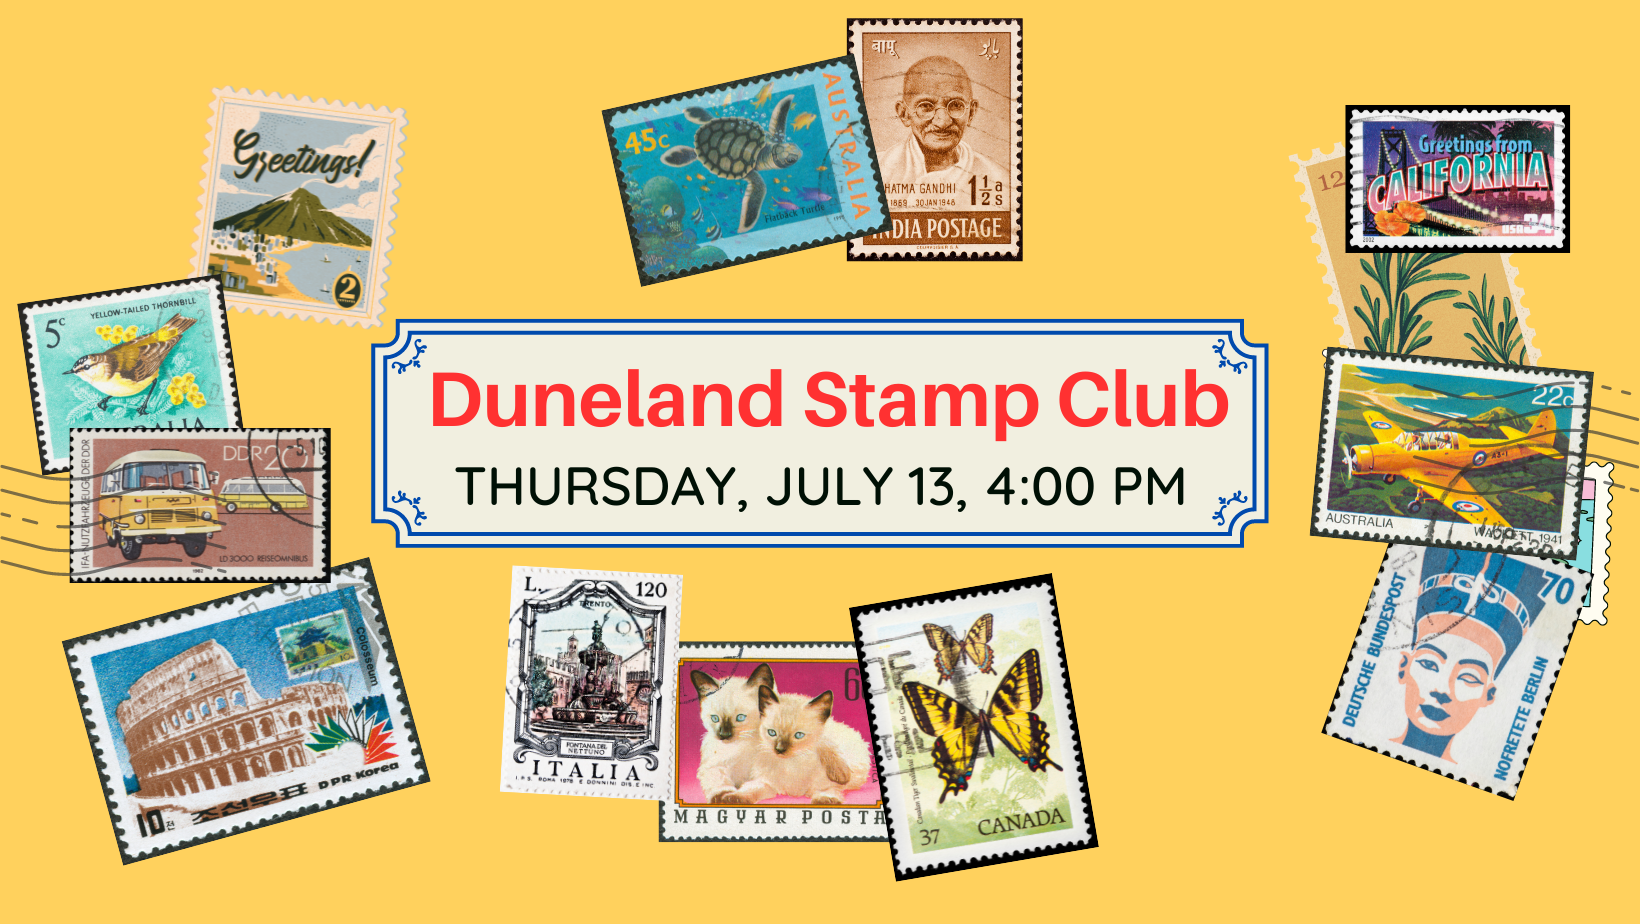 Duneland Stamp Club, Thursday, July 13 at 4pm